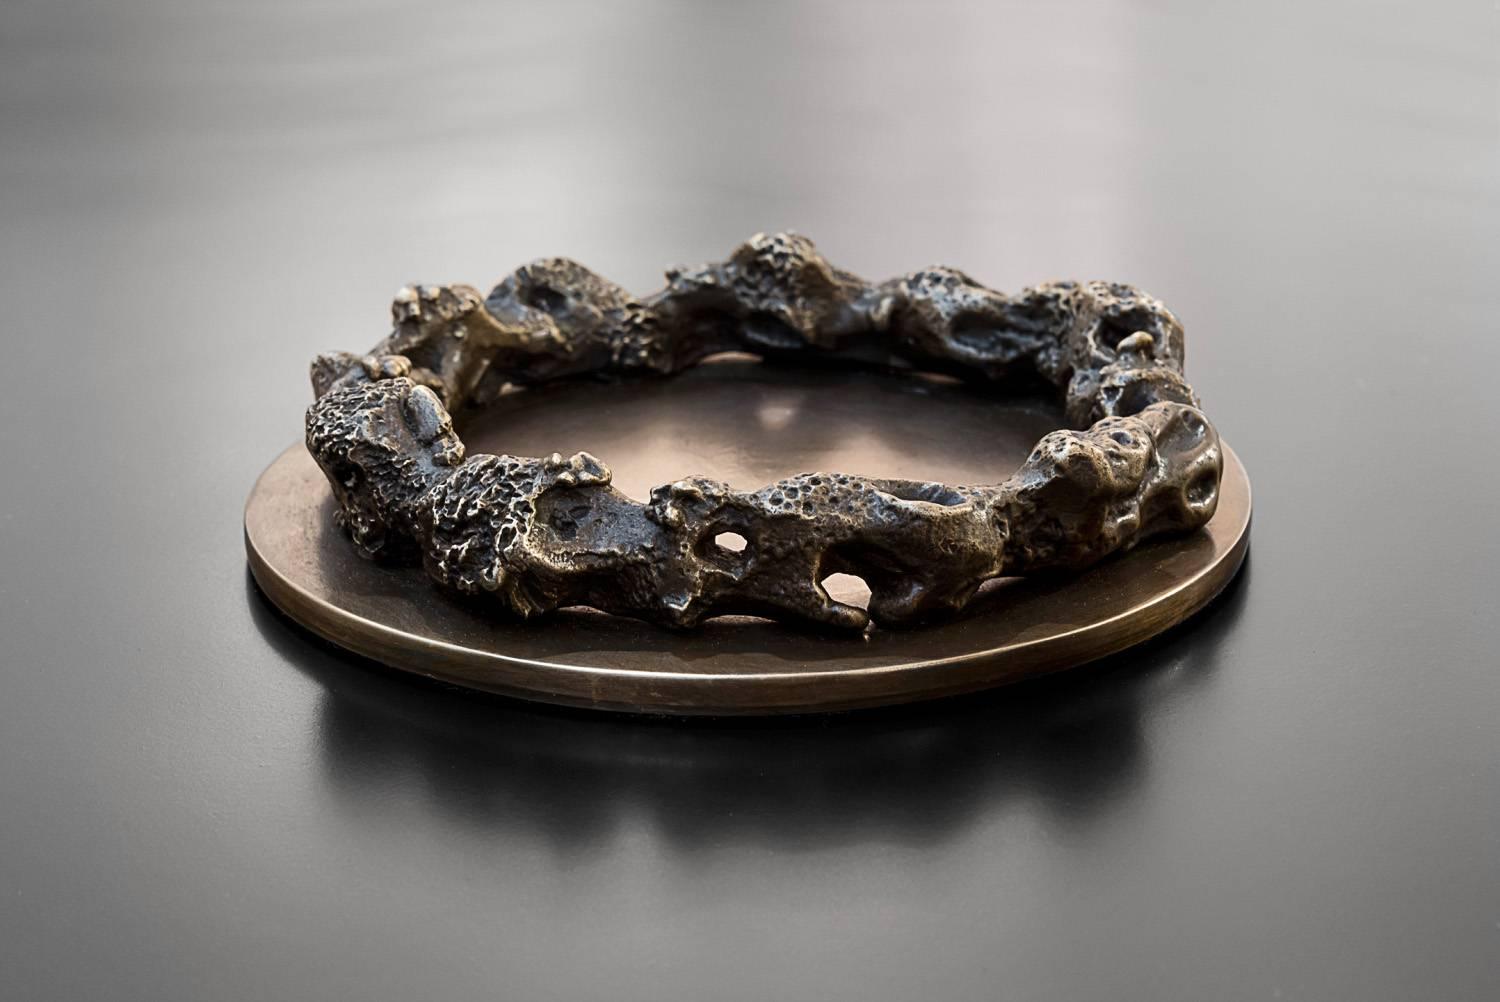 Mattia Bonetti
Dish 'Grotto Circular,'
Can be used as a wine bottle holder.
2015.
Bronze, patinated.
H 3 x diameter 13.5 cm/H 1.2 x diameter 5.3 in.
David Gill Gallery.
For EU buyers this piece is subject to a 20% VAT tax, which will be added to the